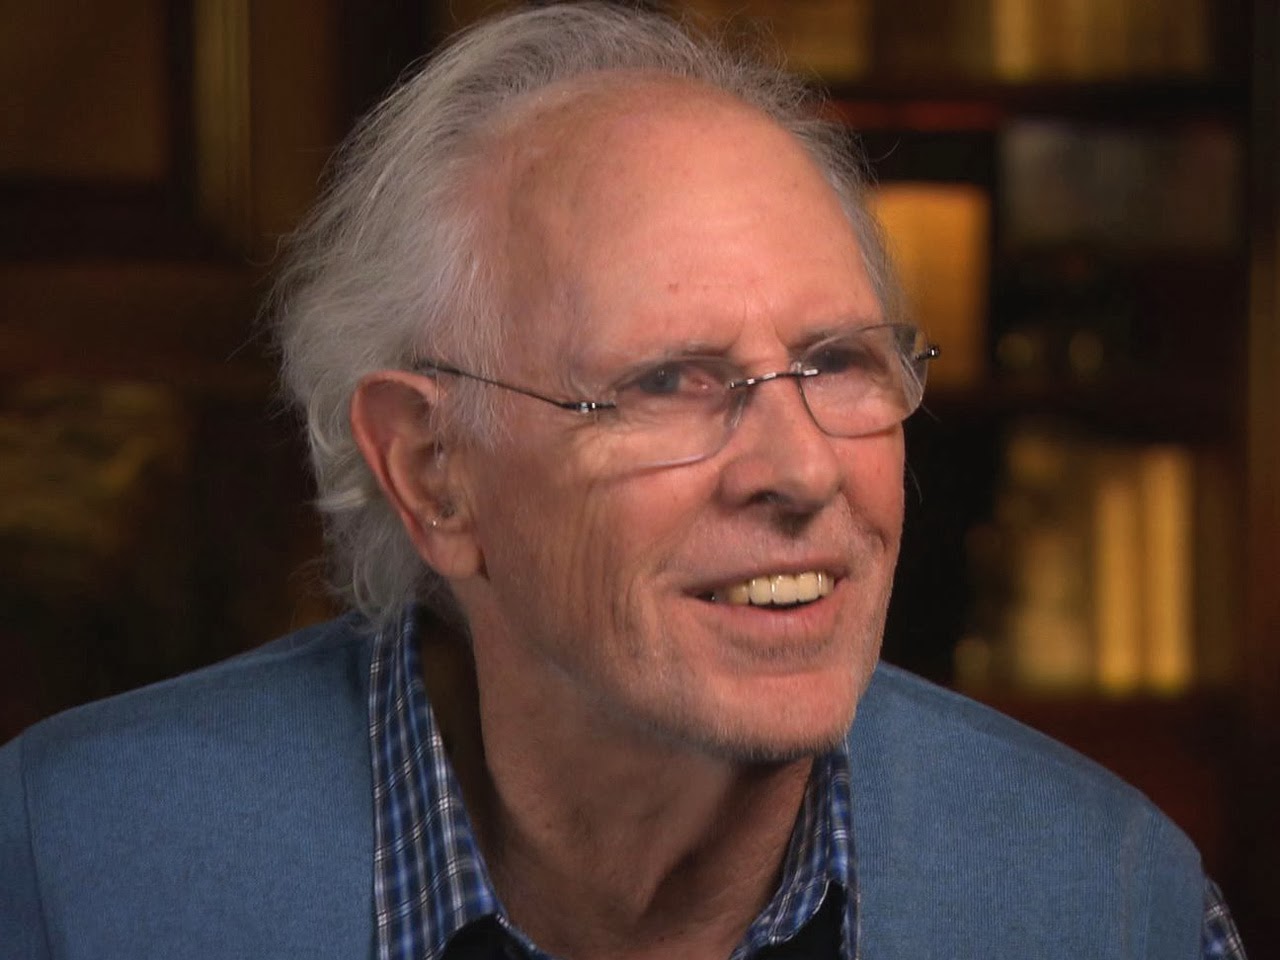 All movies starring Bruce Dern and reviewed on the Ace Black Blog are linke...